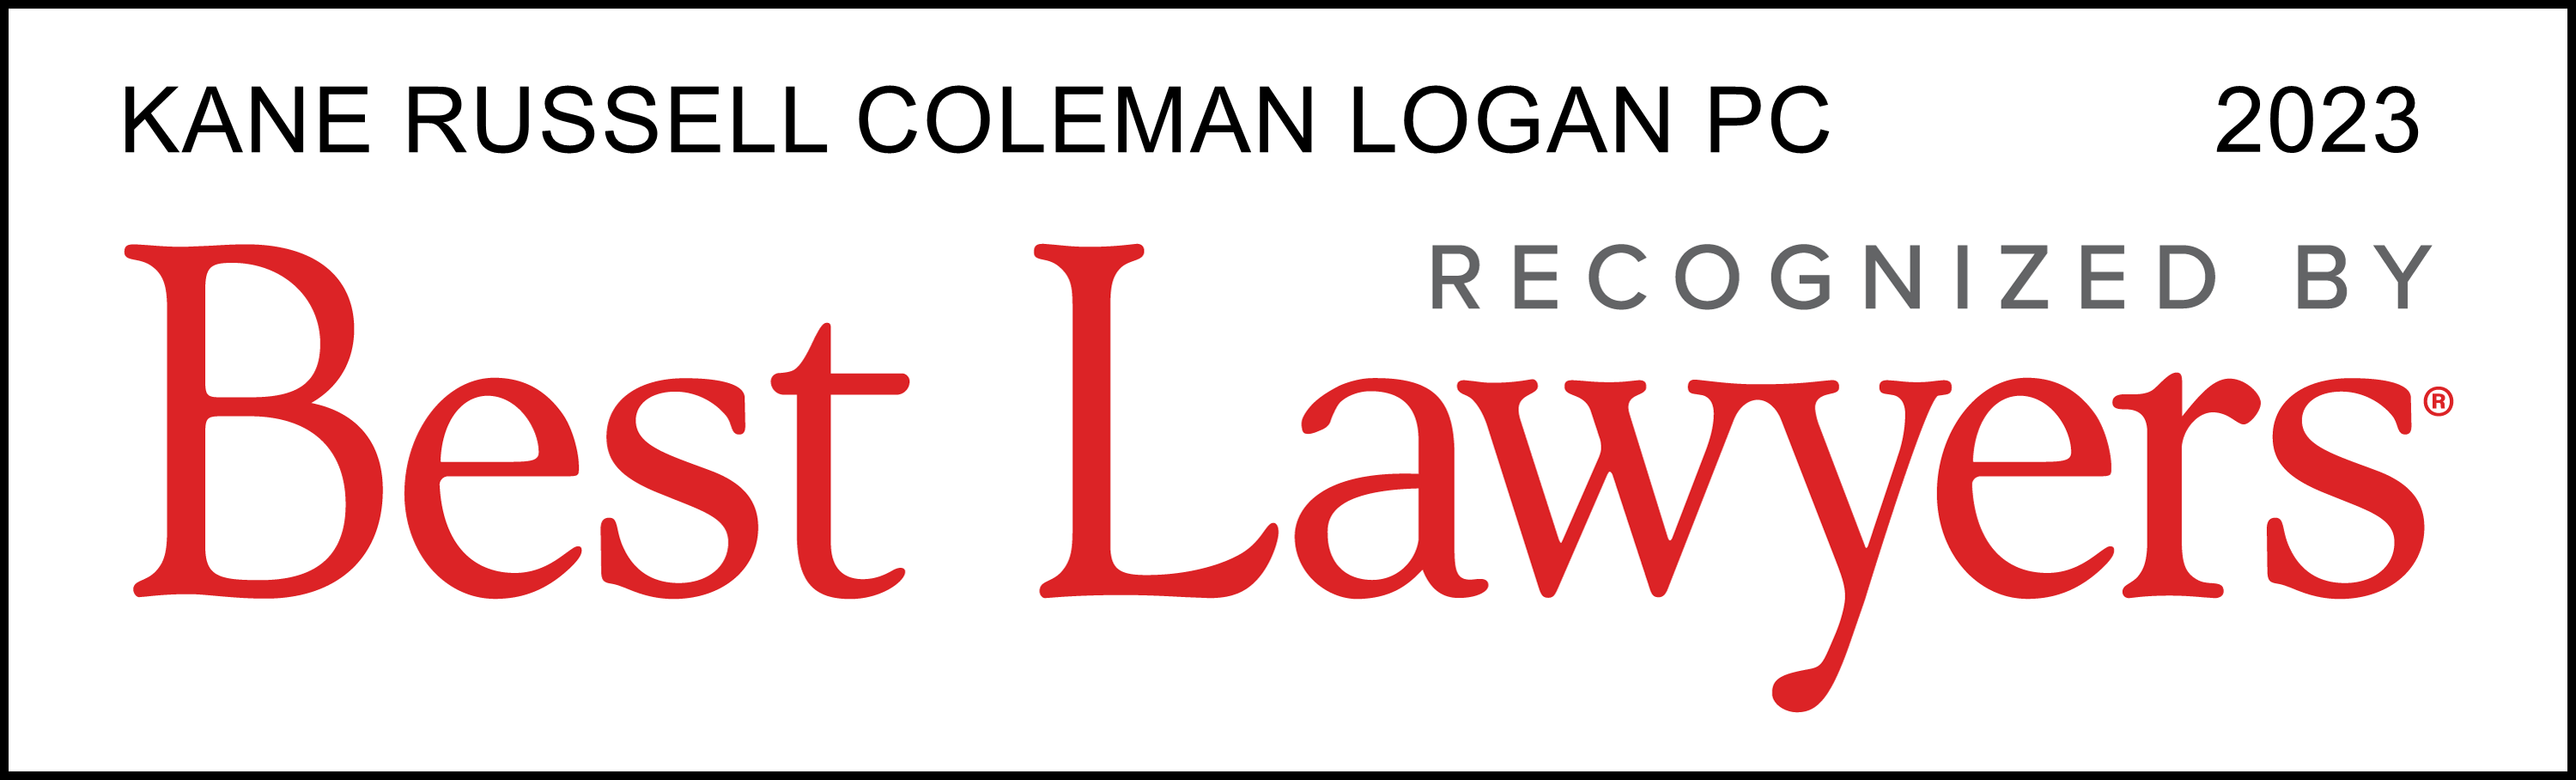 Kane Russell Coleman Logan PC
2022
Recognized by Best Lawyers